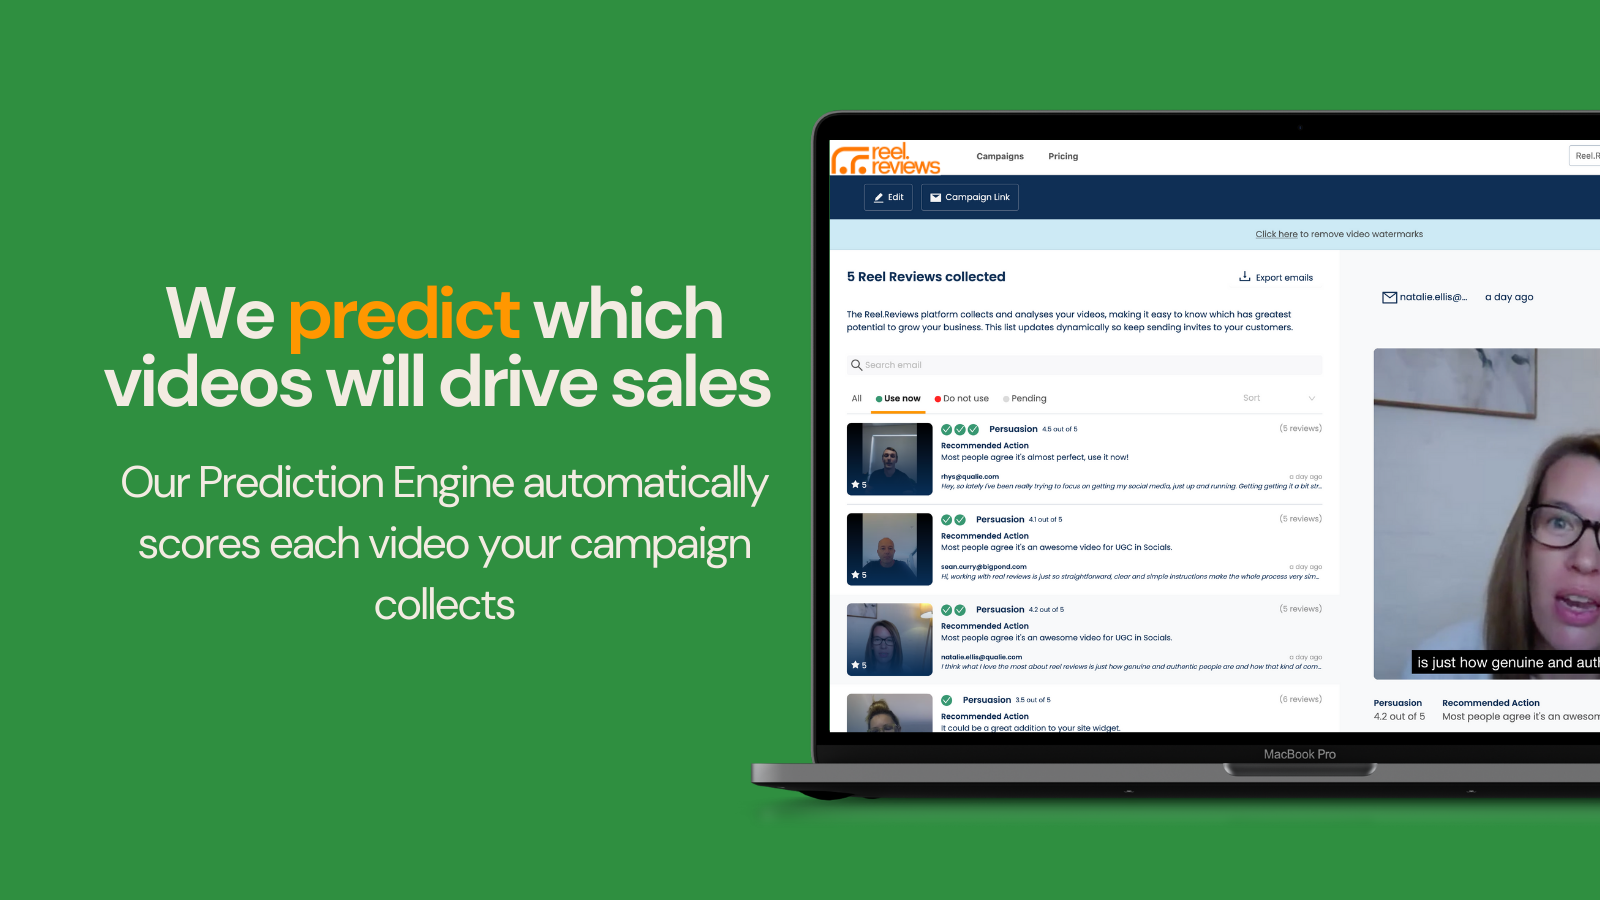 Manage your video reviews with ease from your dashboard